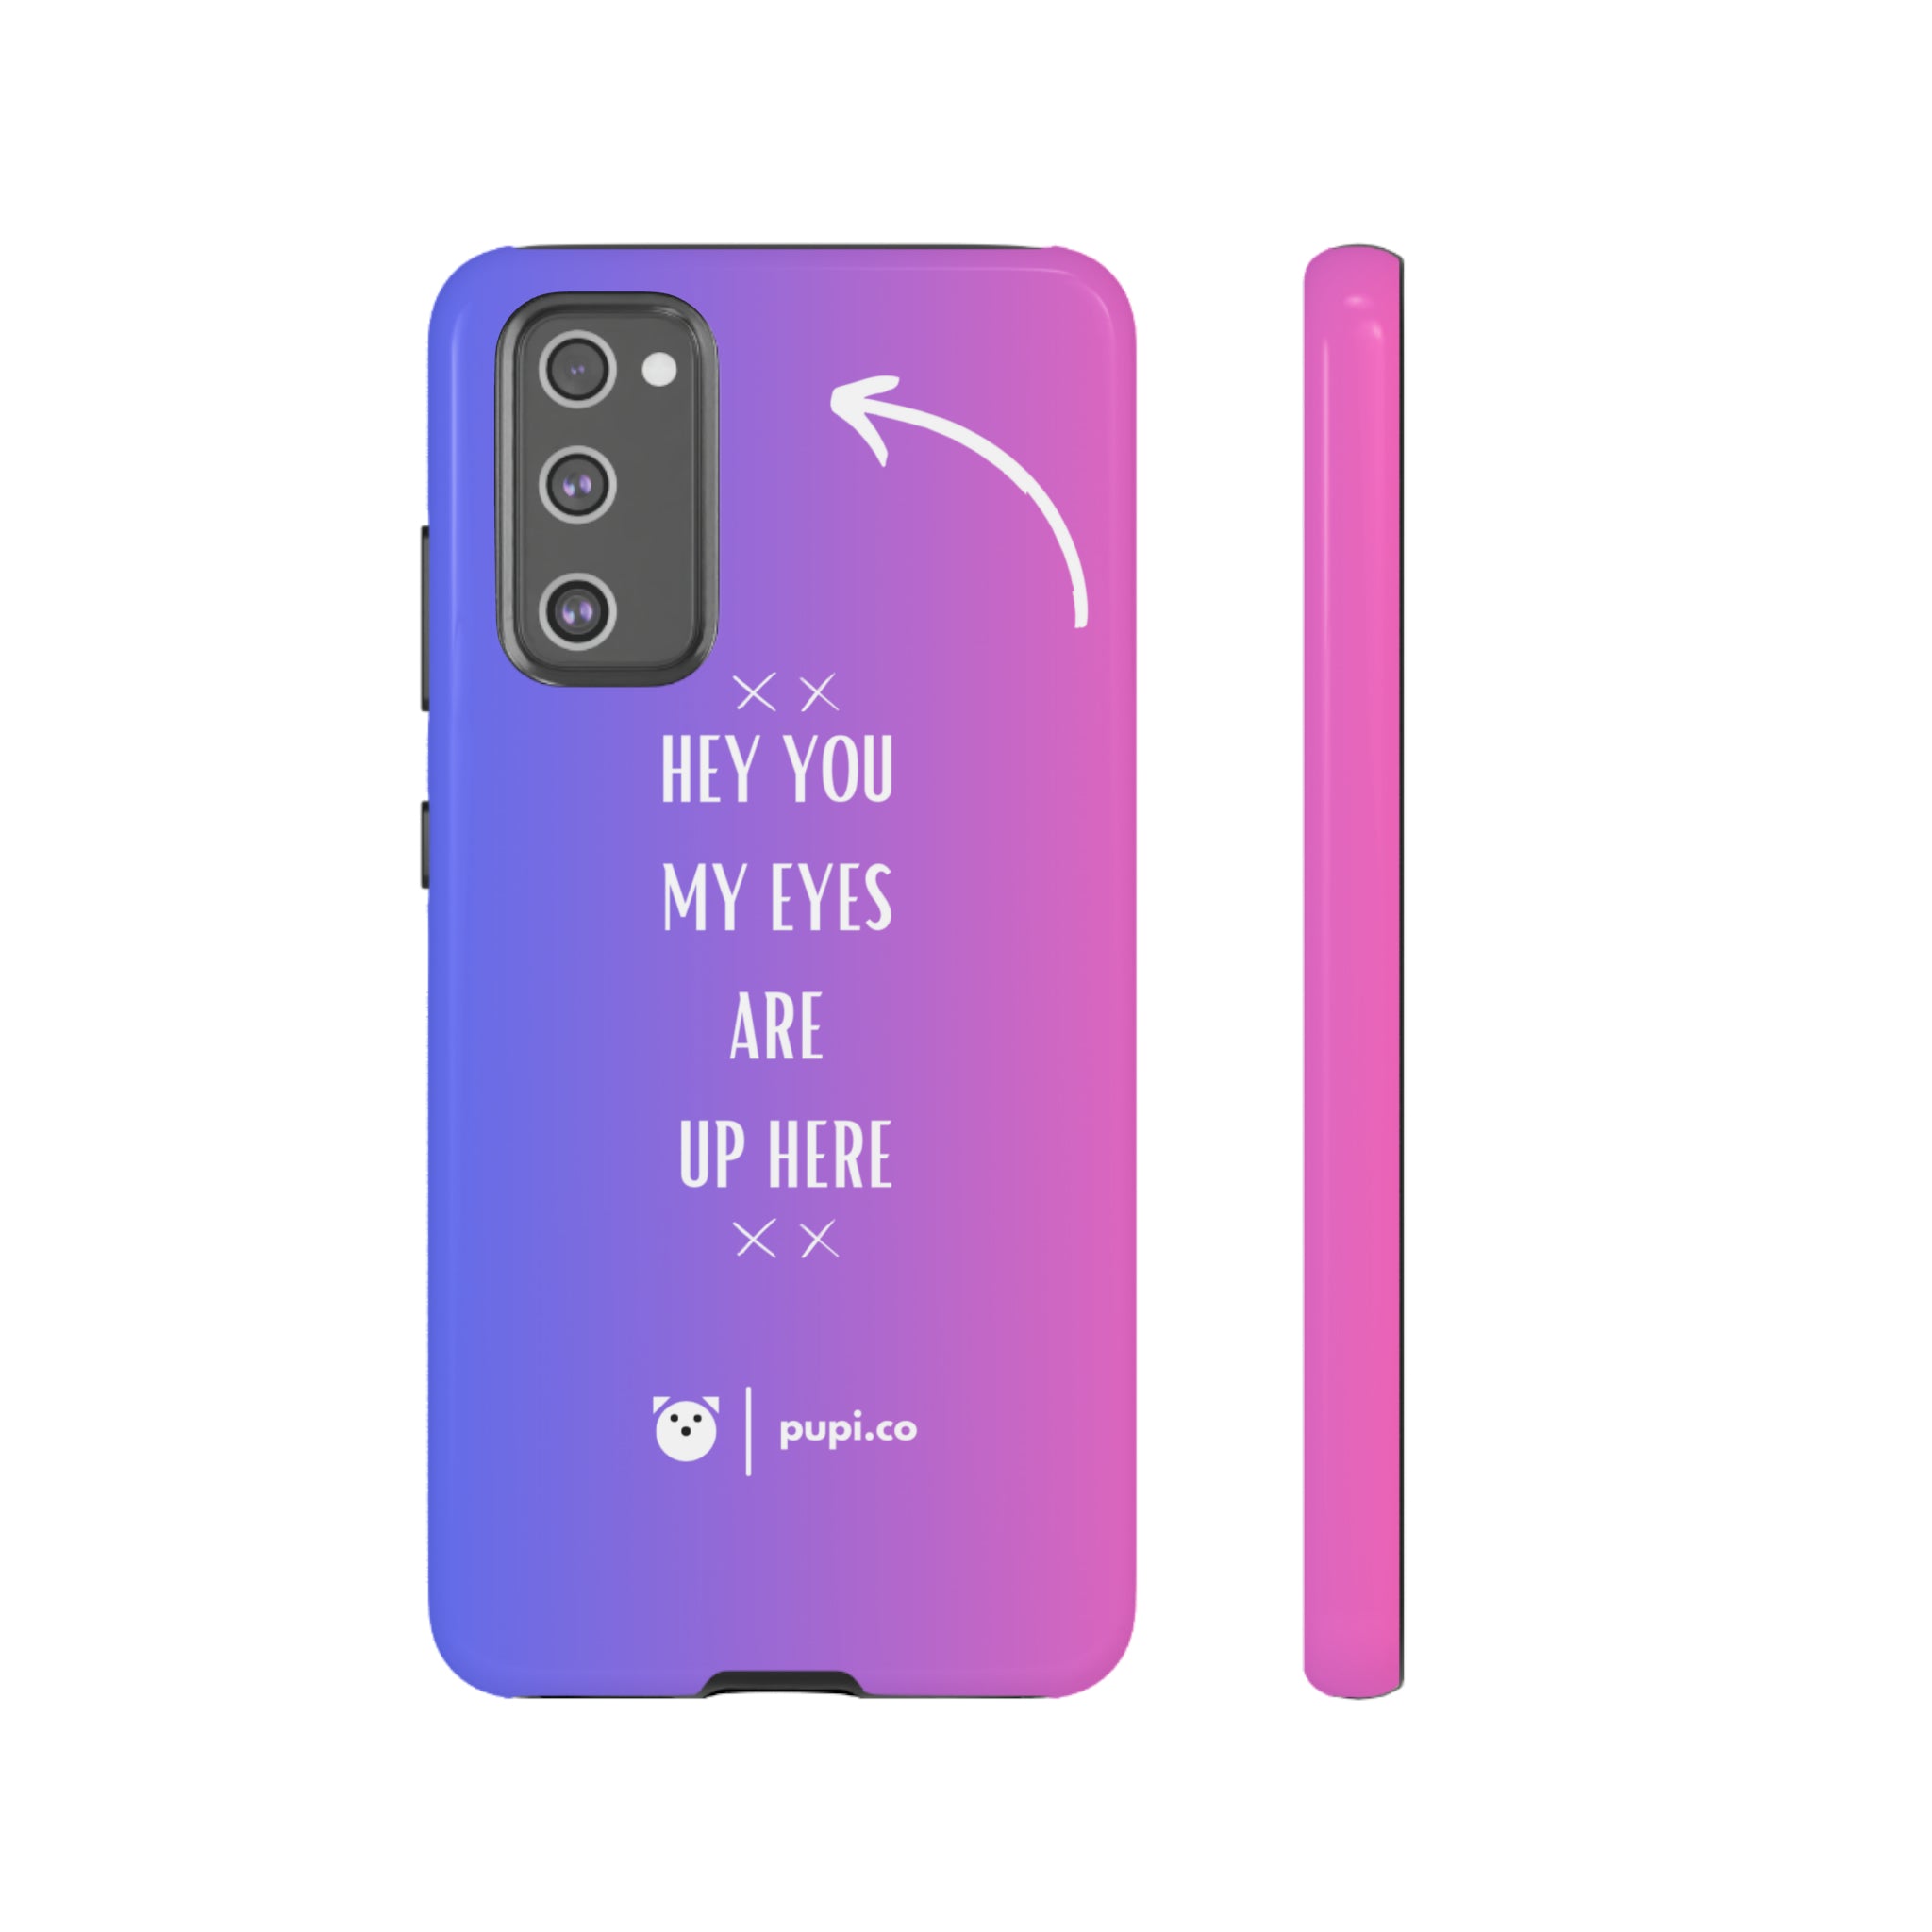 hey you | Phone case